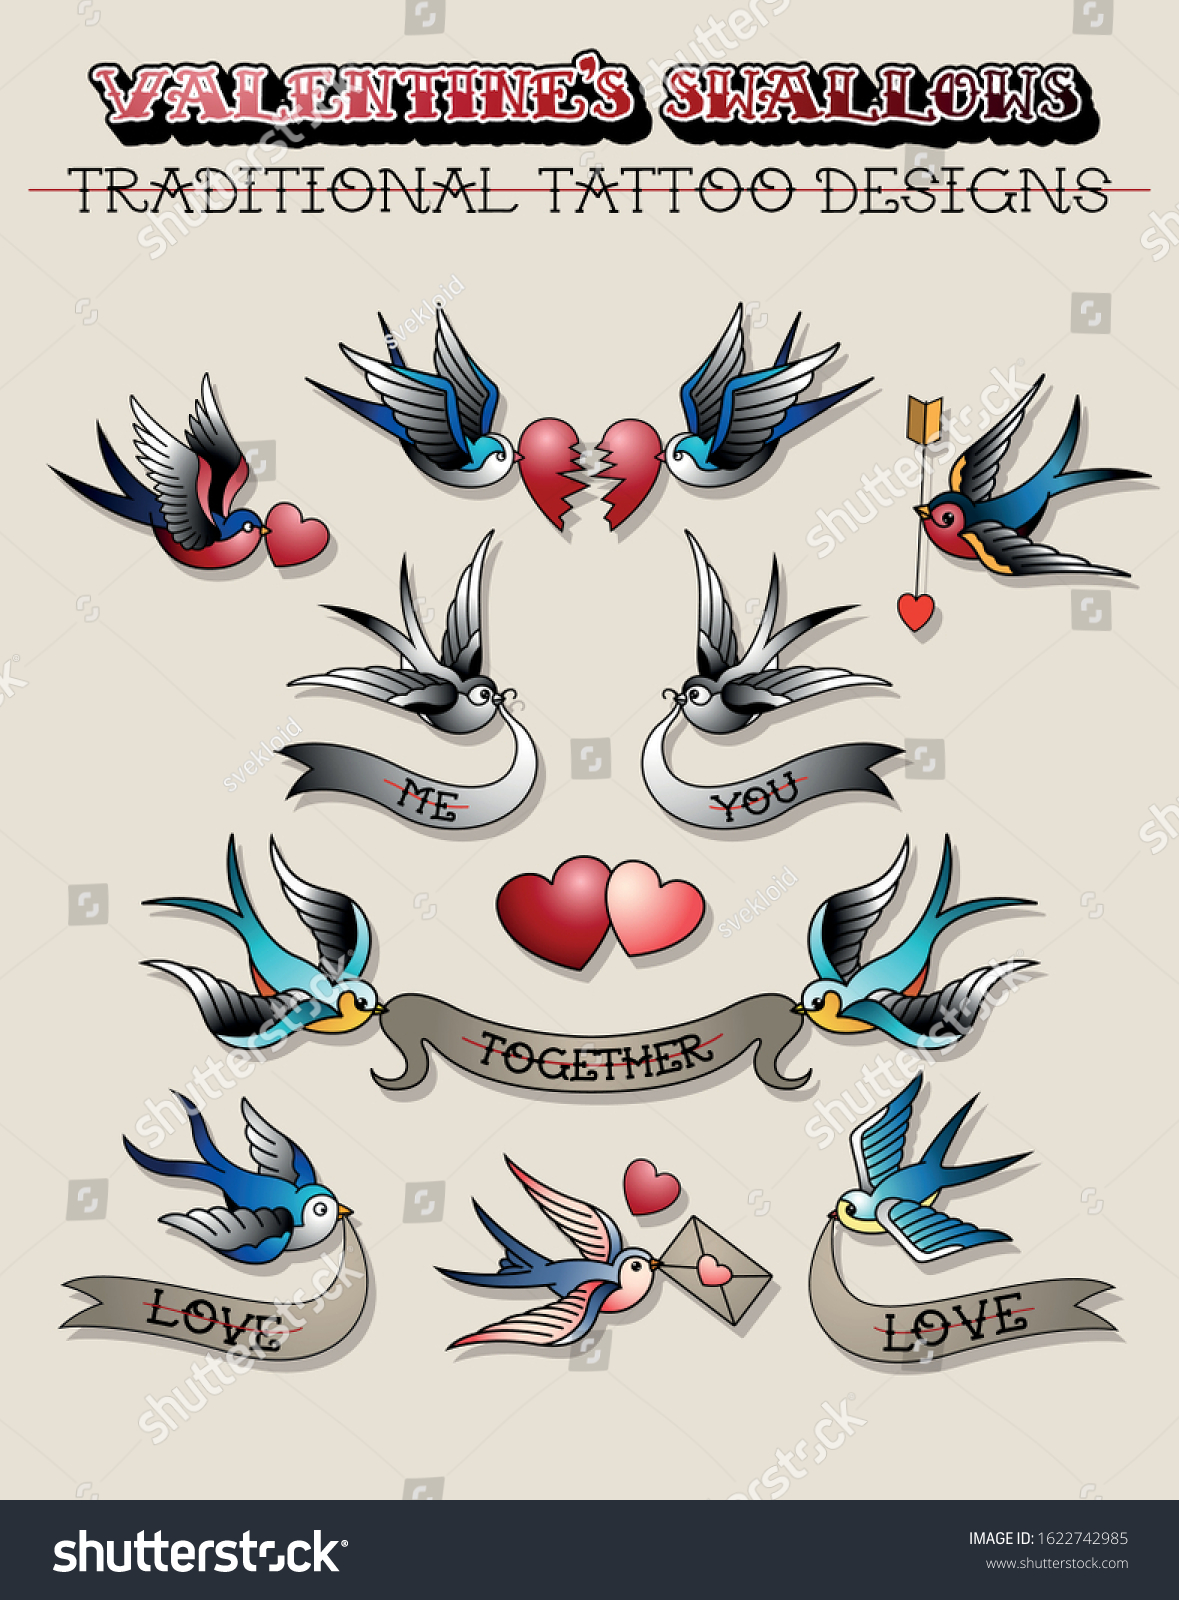 Valentines Day Swallows Traditional Tattoo Designs Stock Vector Royalty Free 1622742985